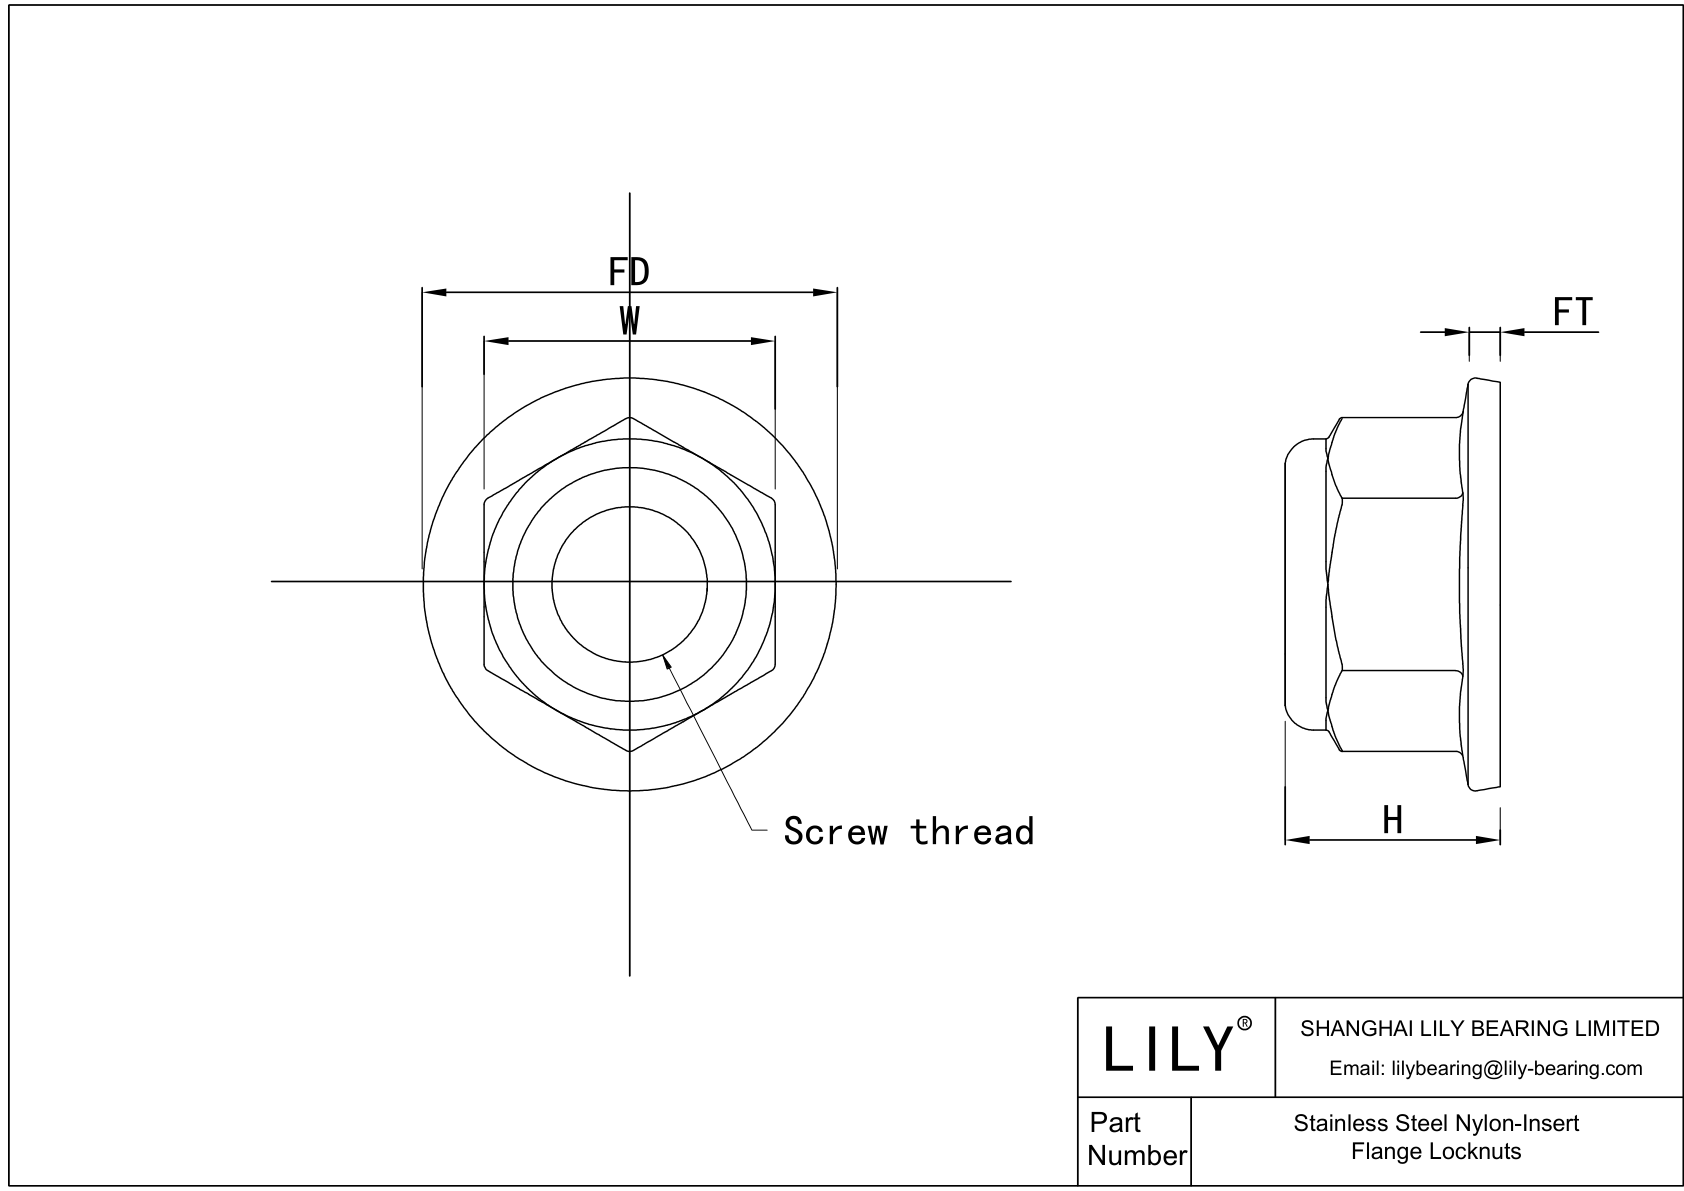 JECDIAGGG Stainless Steel Nylon-Insert Flange Locknuts cad drawing